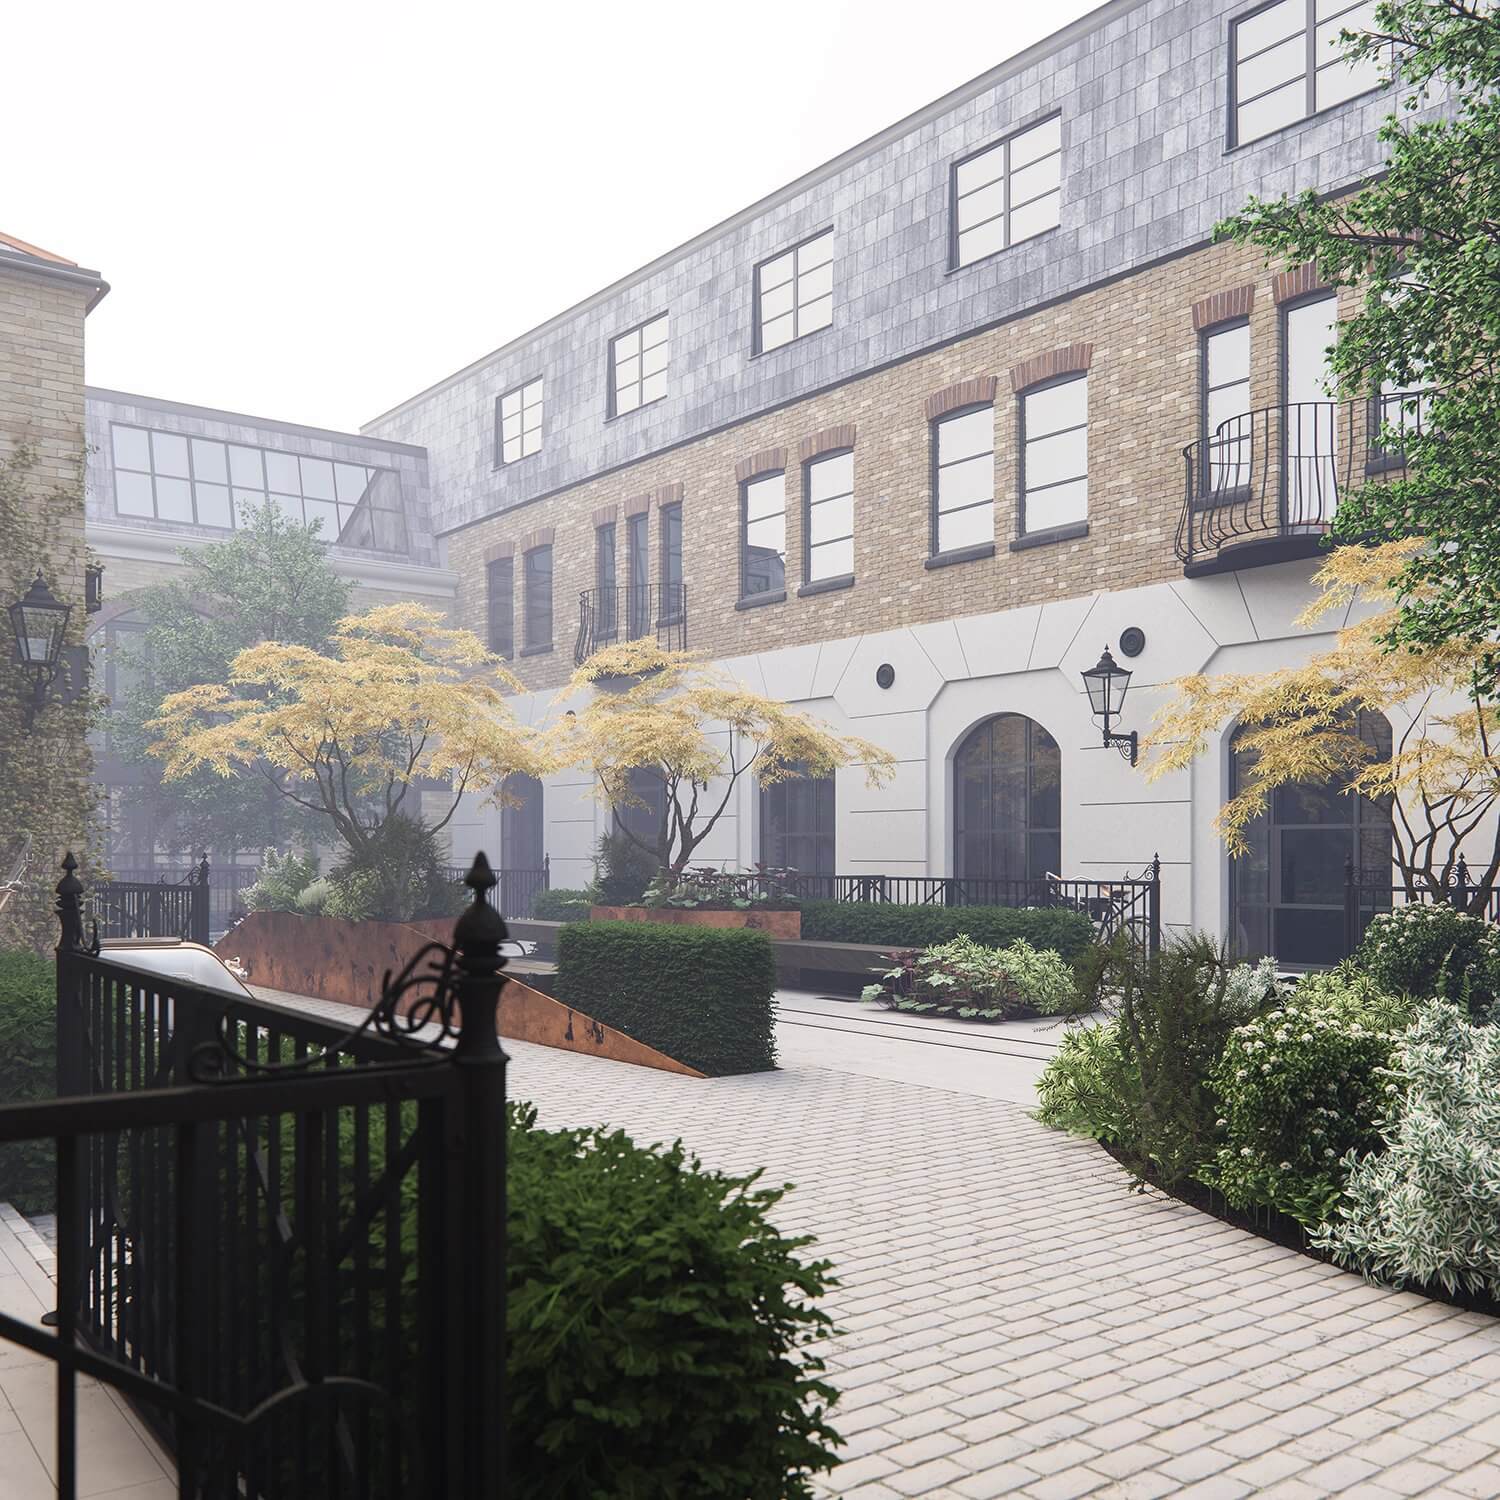 7 Old Town Clapham Apartment courtyard trees - cgi visualization